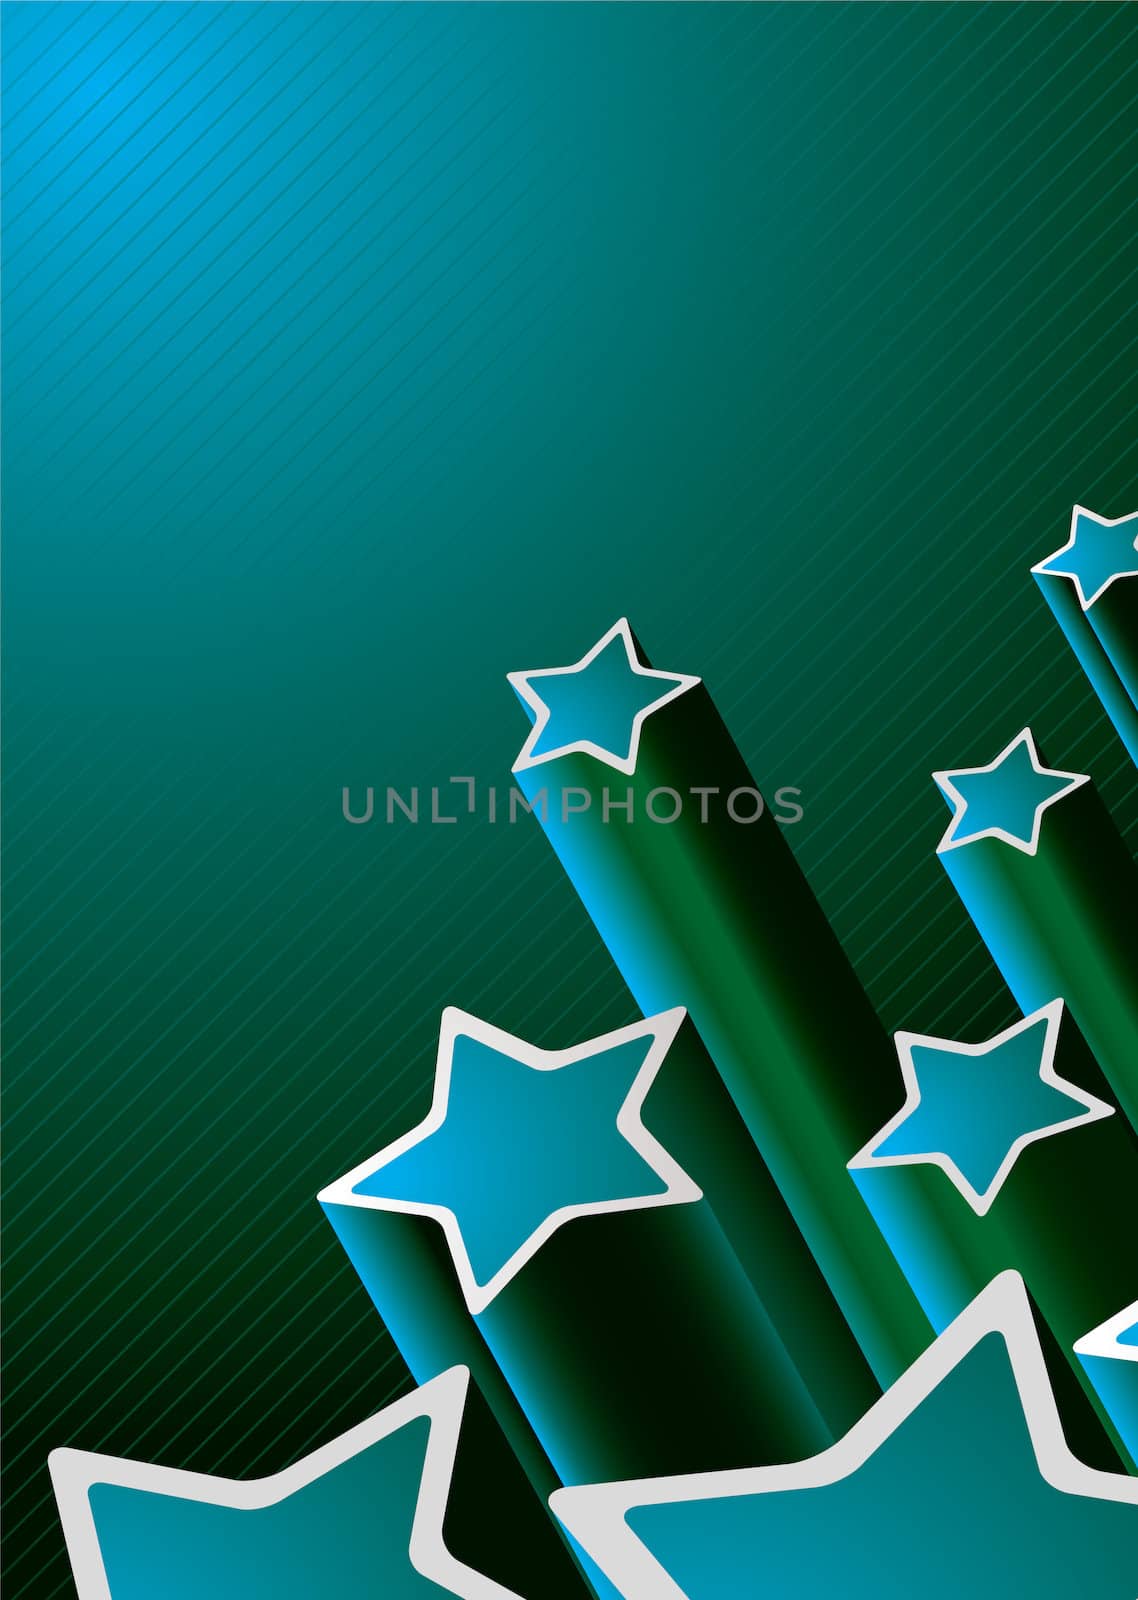 Blue and green star background with copy space
